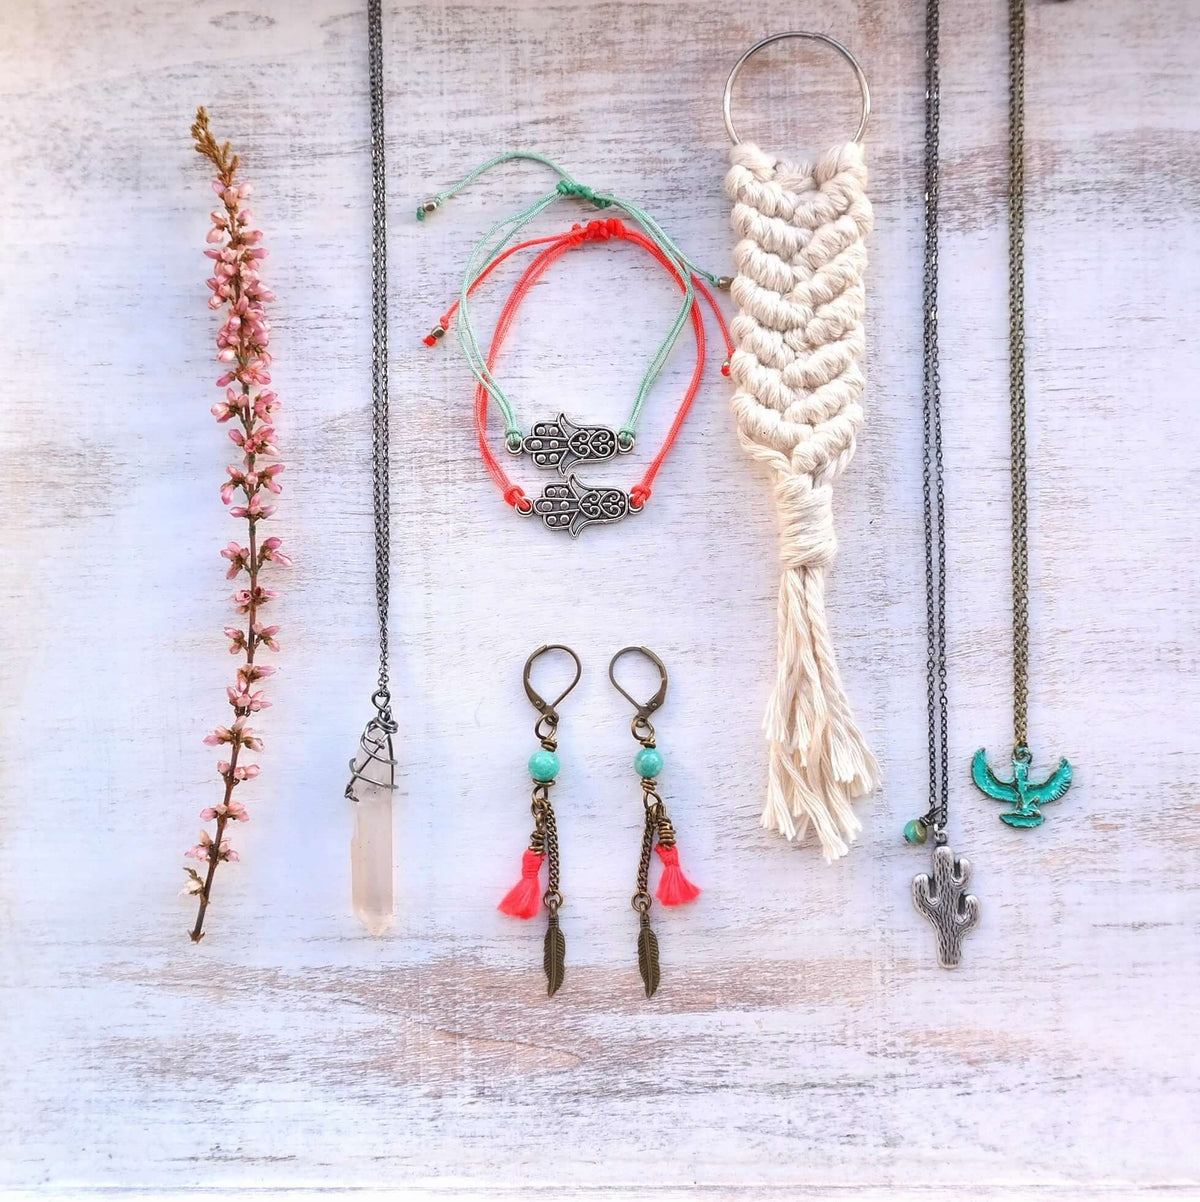 Why you should choose to buy handmade this Christmas - Gypsy Soul Jewellery